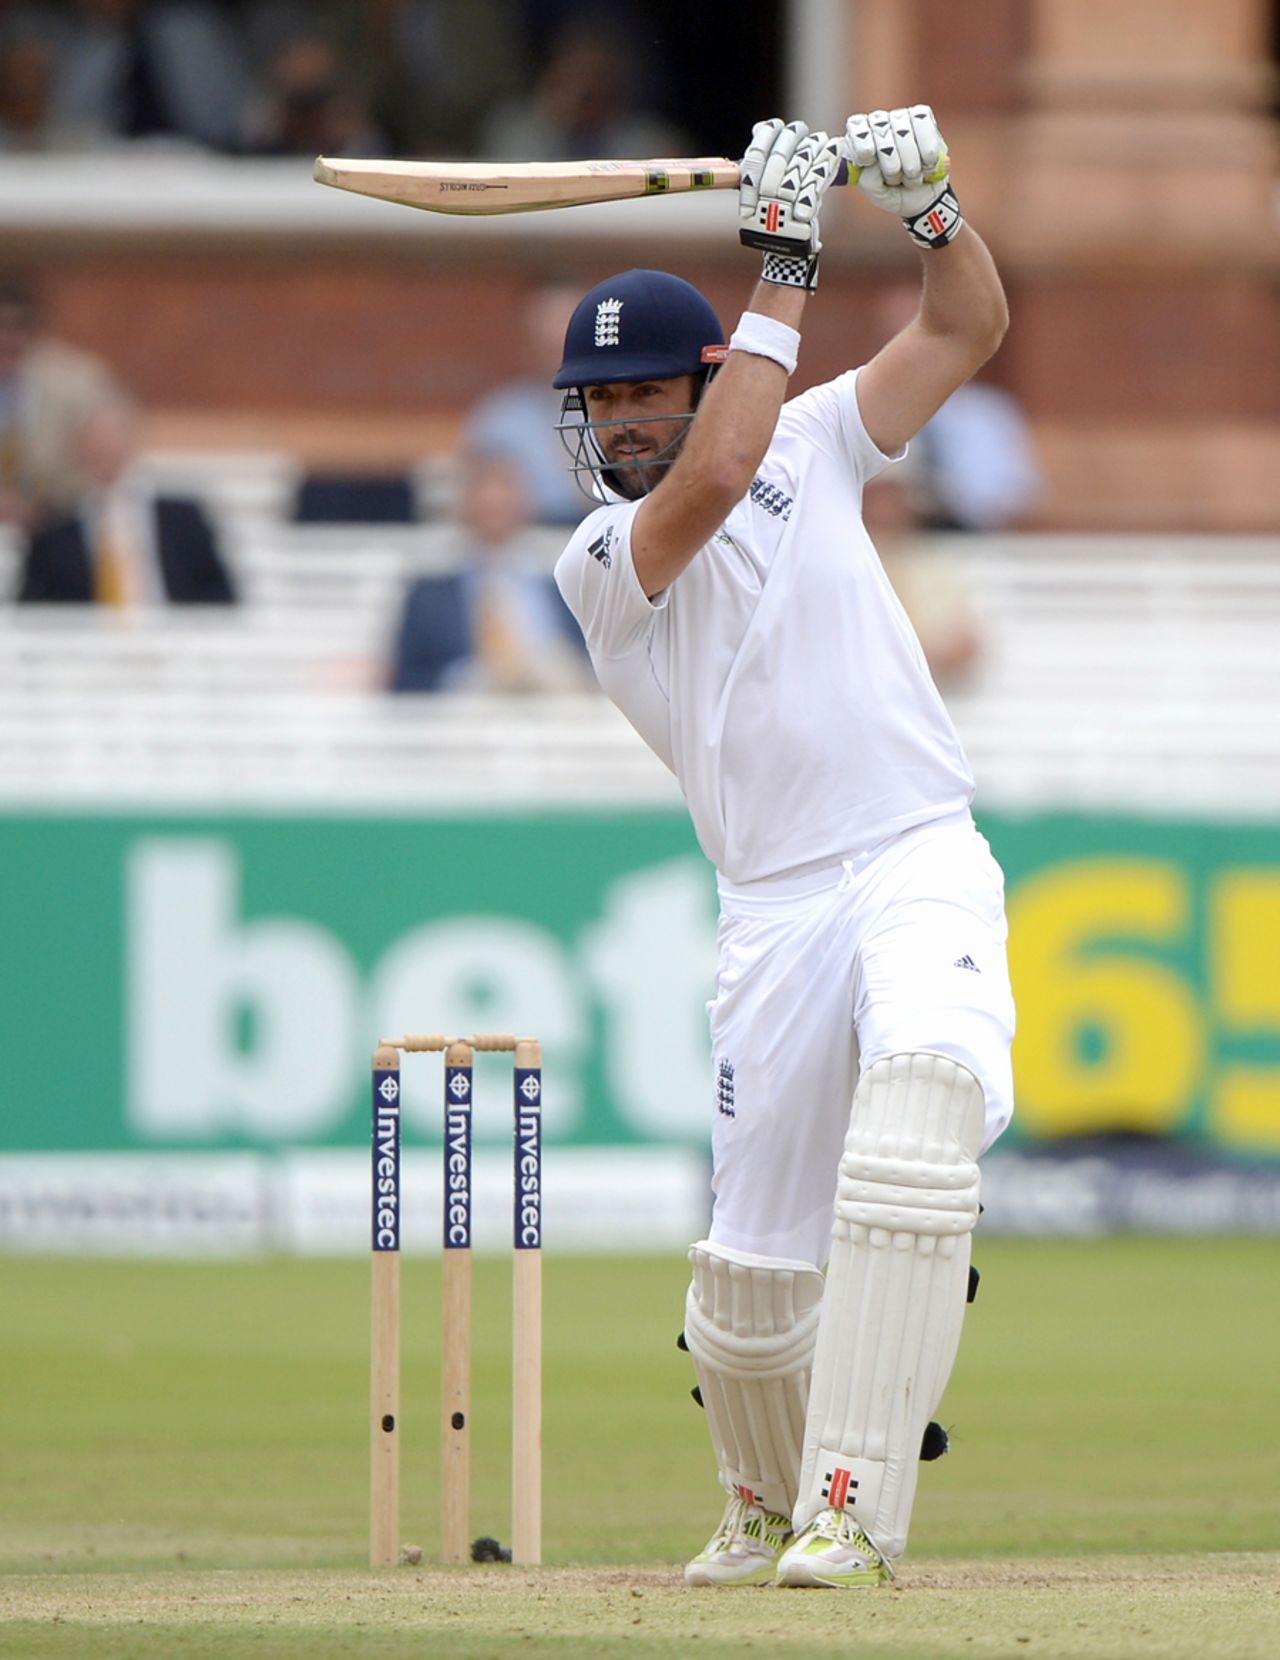 Liam Plunkett creams one through the covers, England v India, 2nd Investec Test, Lord's, 3rd day, July 19, 2014